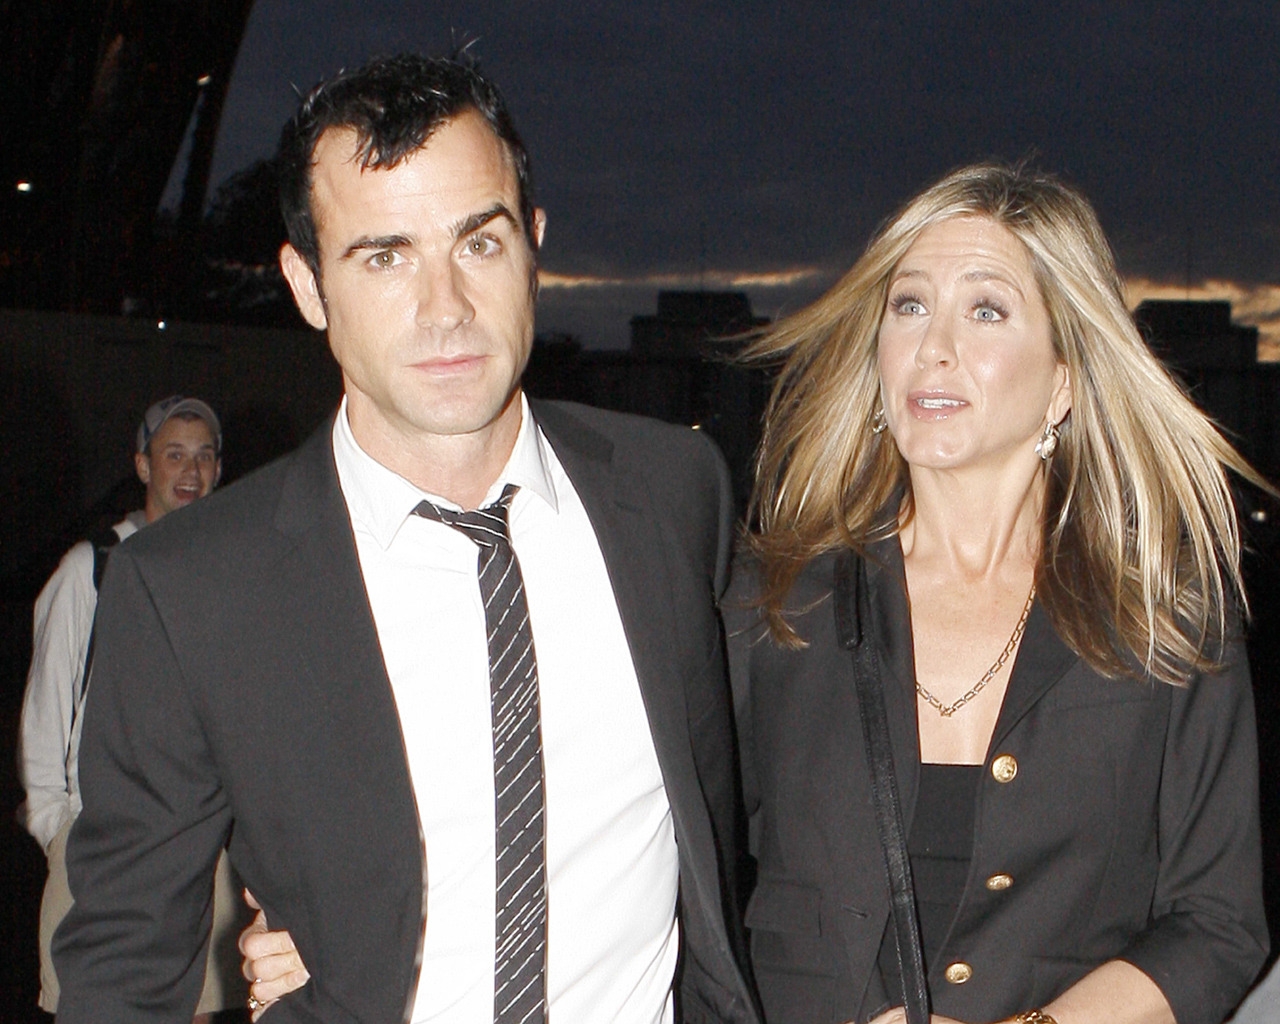 Jennifer Aniston and Justin Theroux for 1280 x 1024 resolution